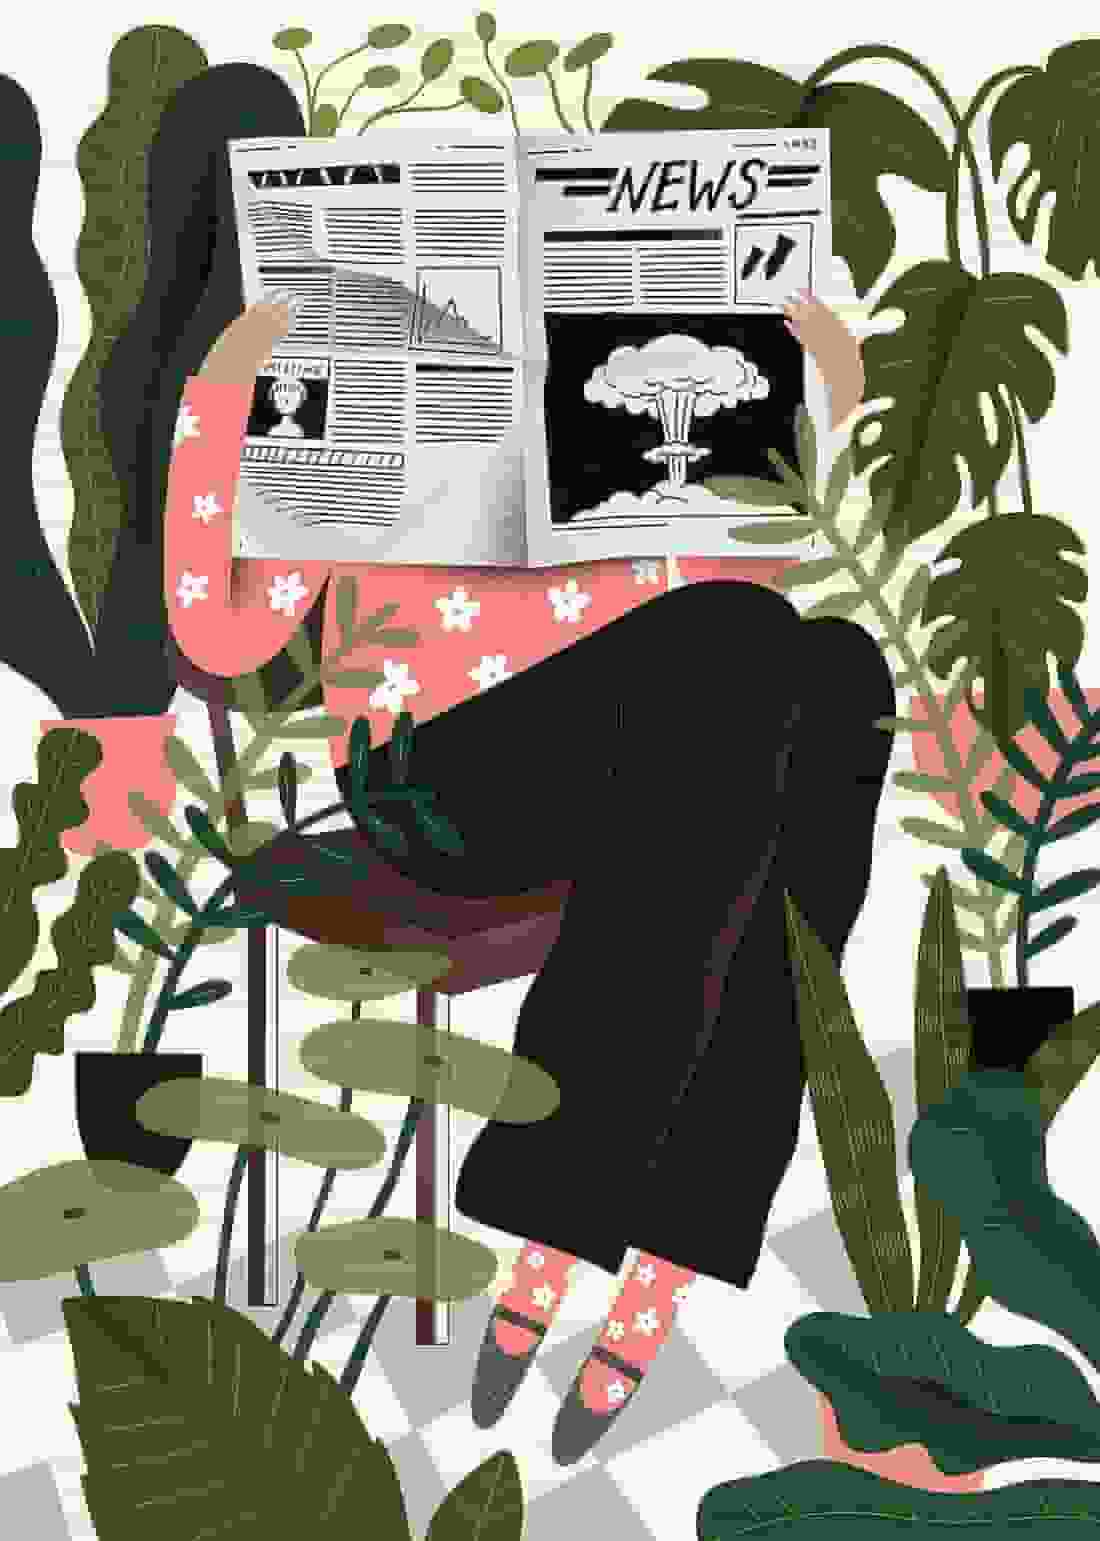 Zestful Illustrations Highlight the Gusto and Charm of Everyday Life：Natalie Shilo’s illustrations each character exudes a zest for life and thrives Zestful Illustrations Highlight the Gusto and Charm of Everyday Life